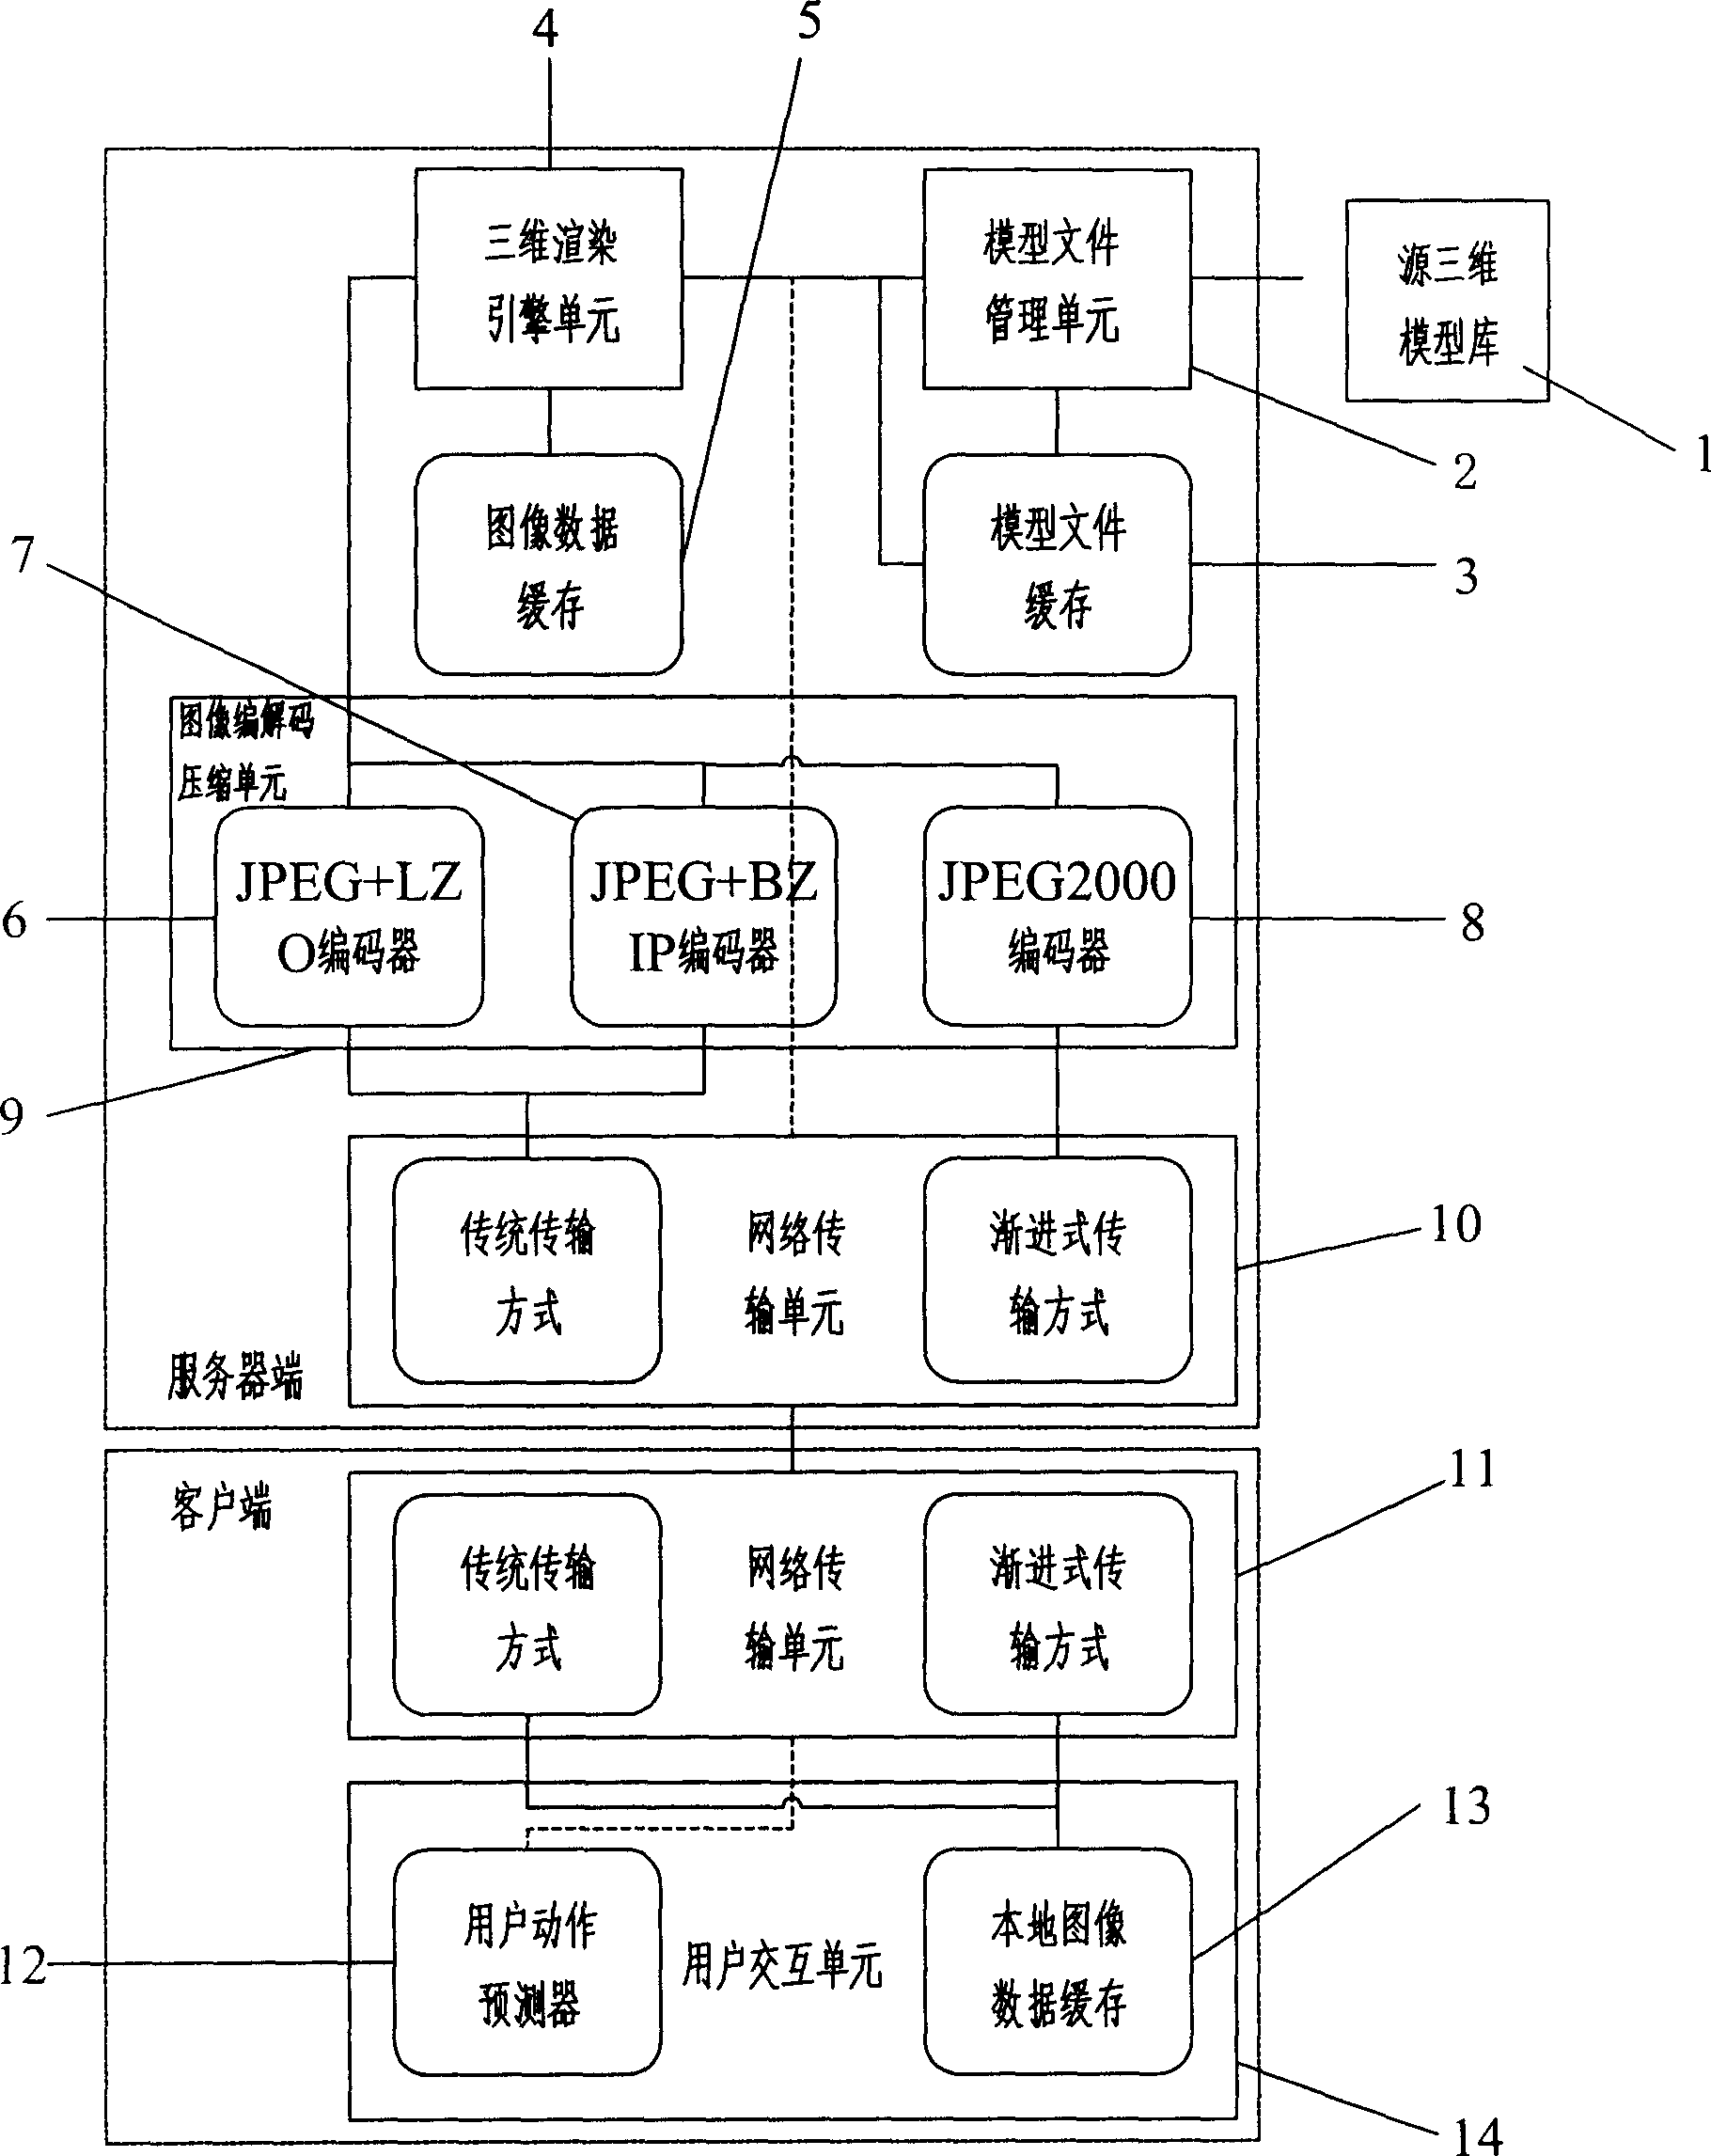 Three-dimensional remote rendering system and method based on image transmission